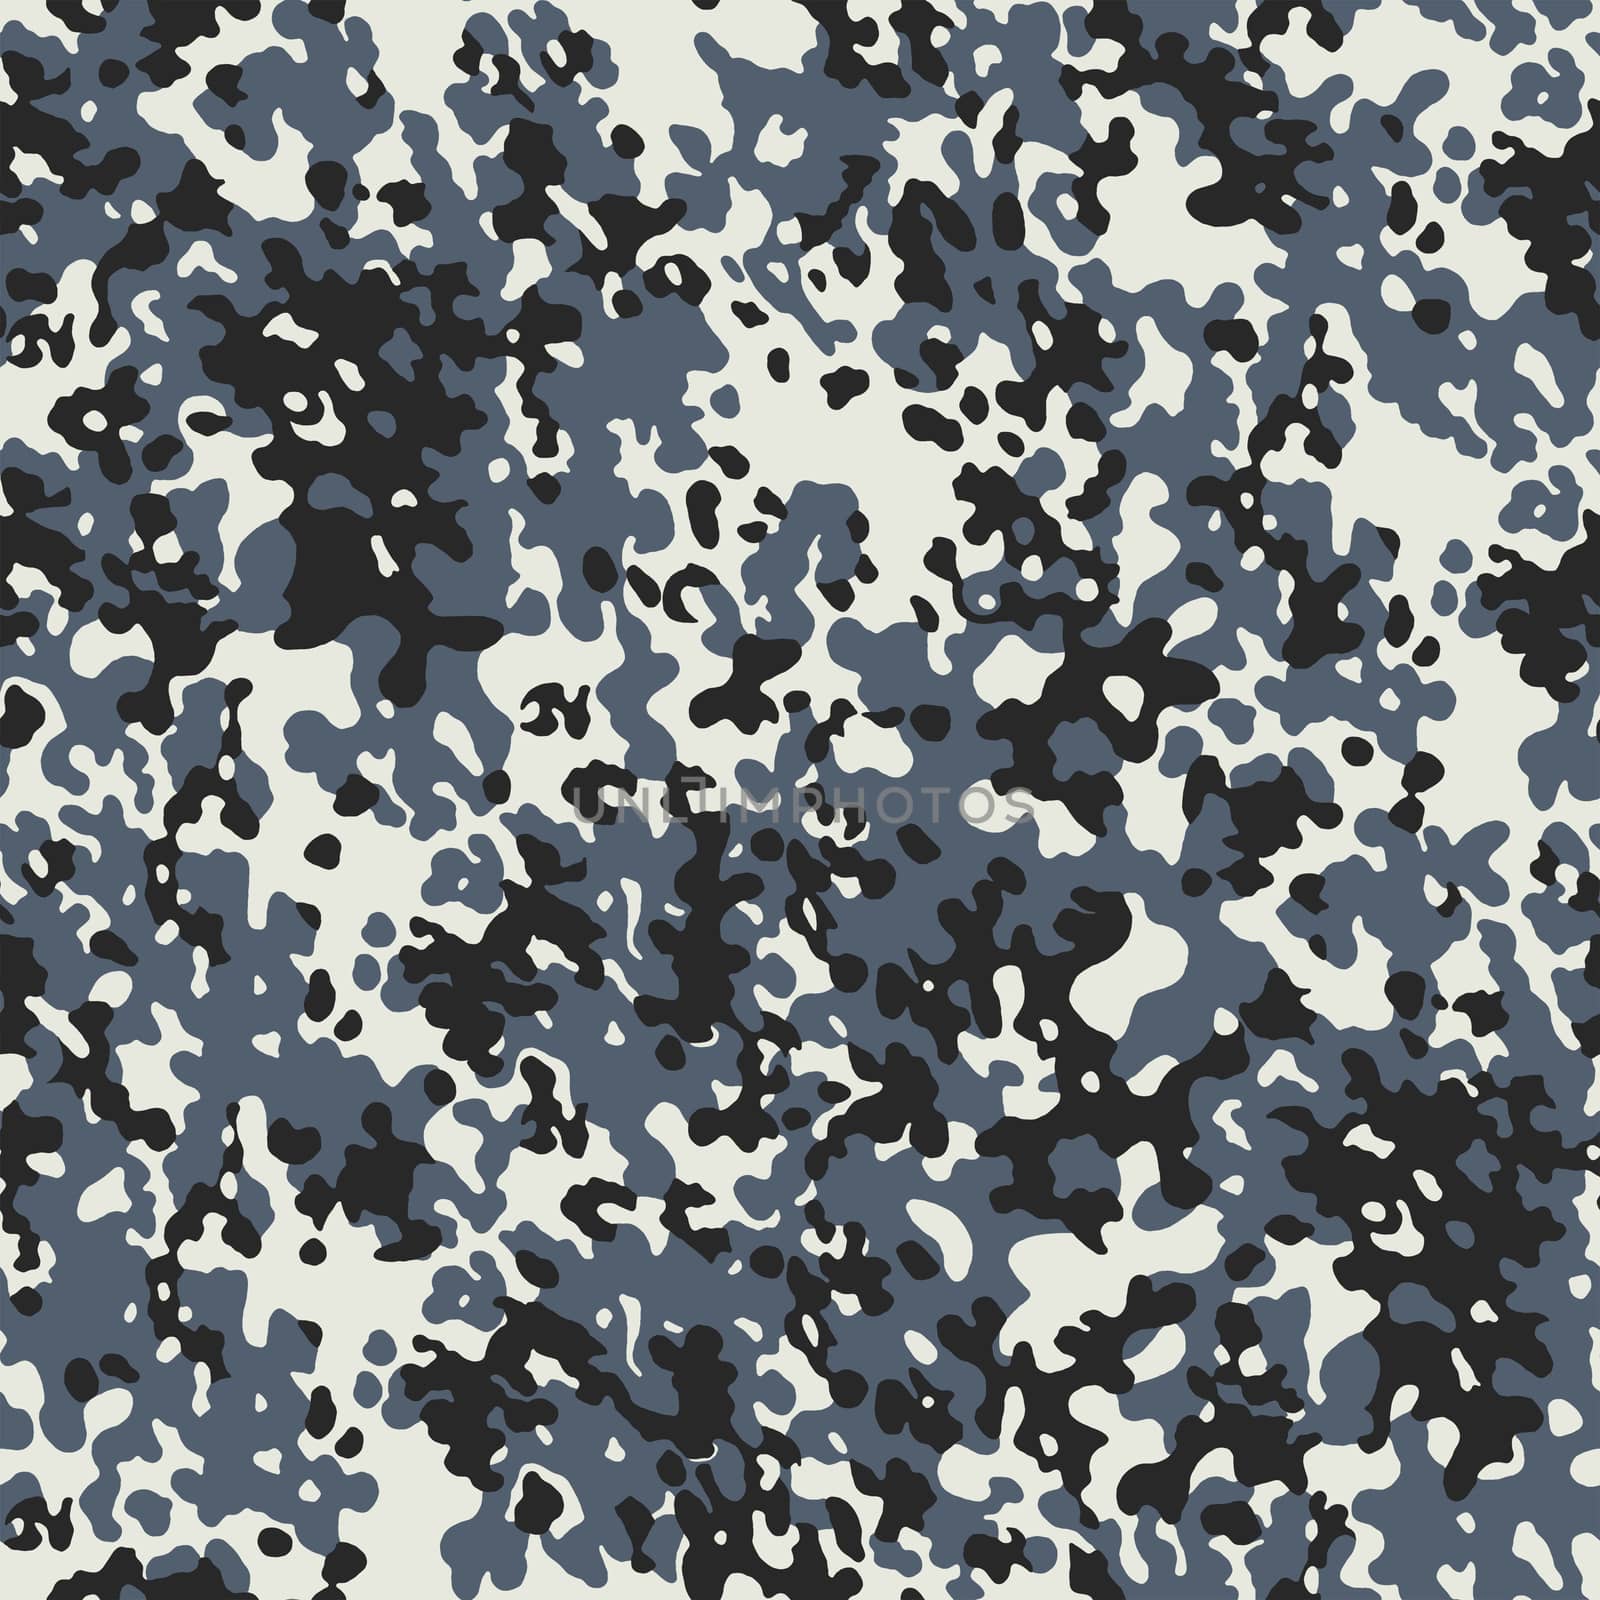 Camouflage pattern of the us army.Texture or background